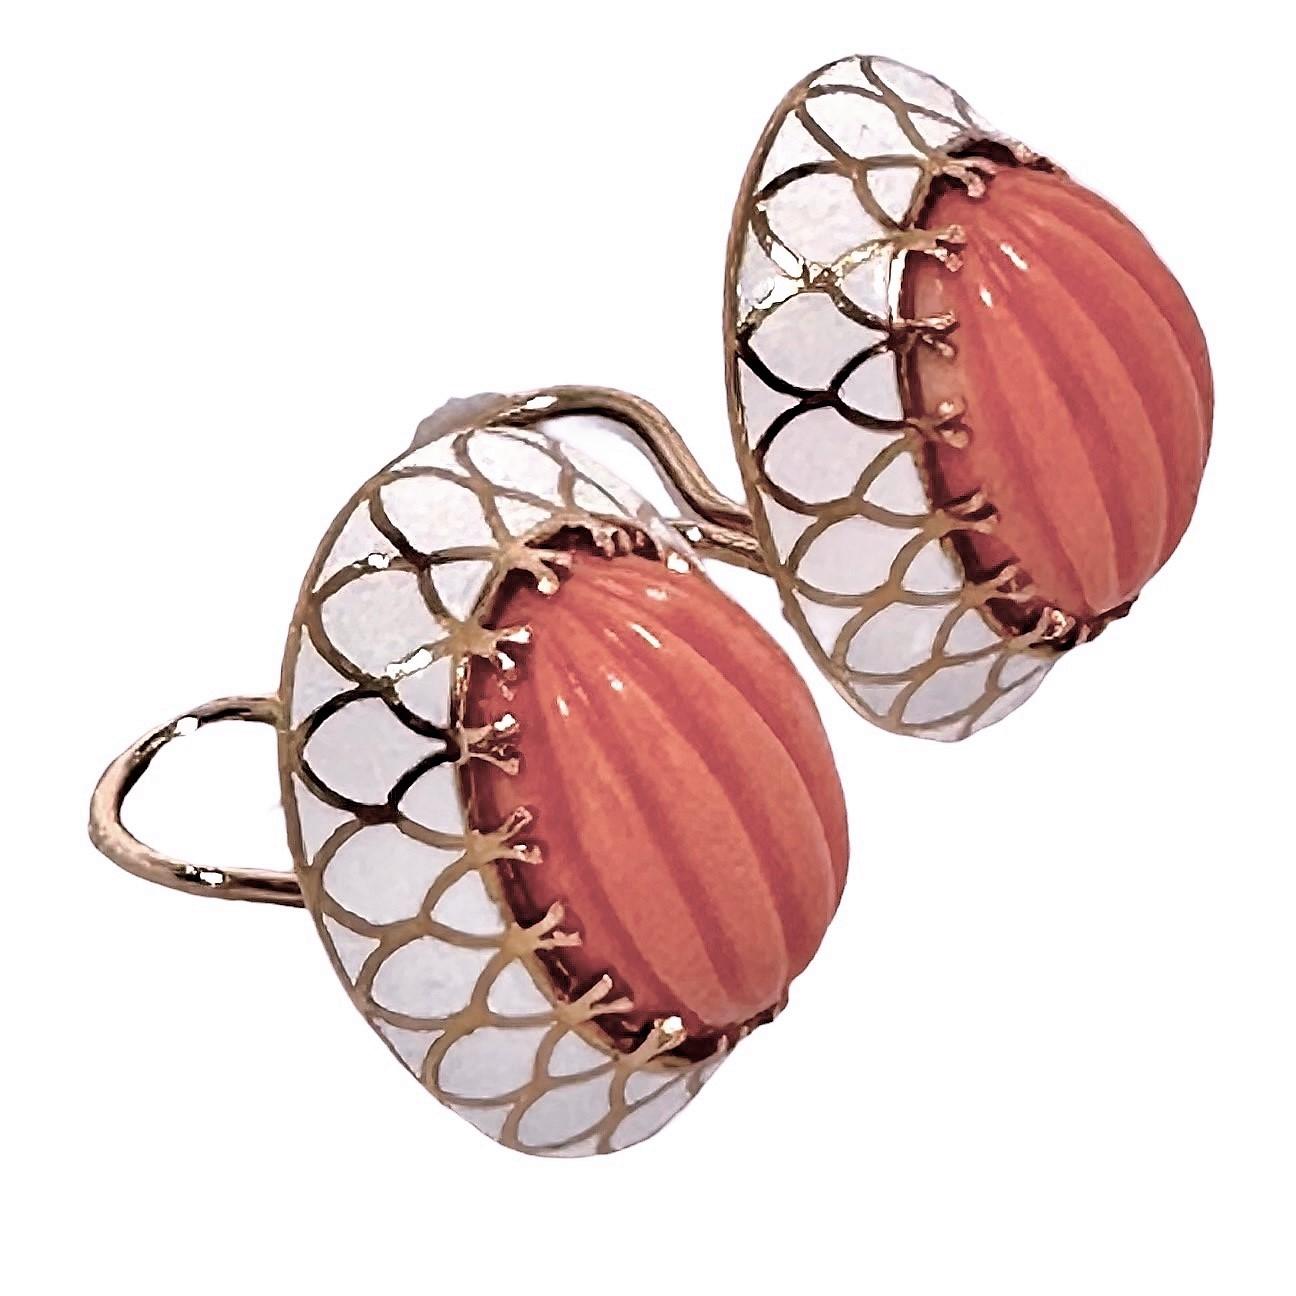 Cabochon 18k Yellow Gold, Salmon Color Coral and White Enamel Earrings - Great for Summer For Sale